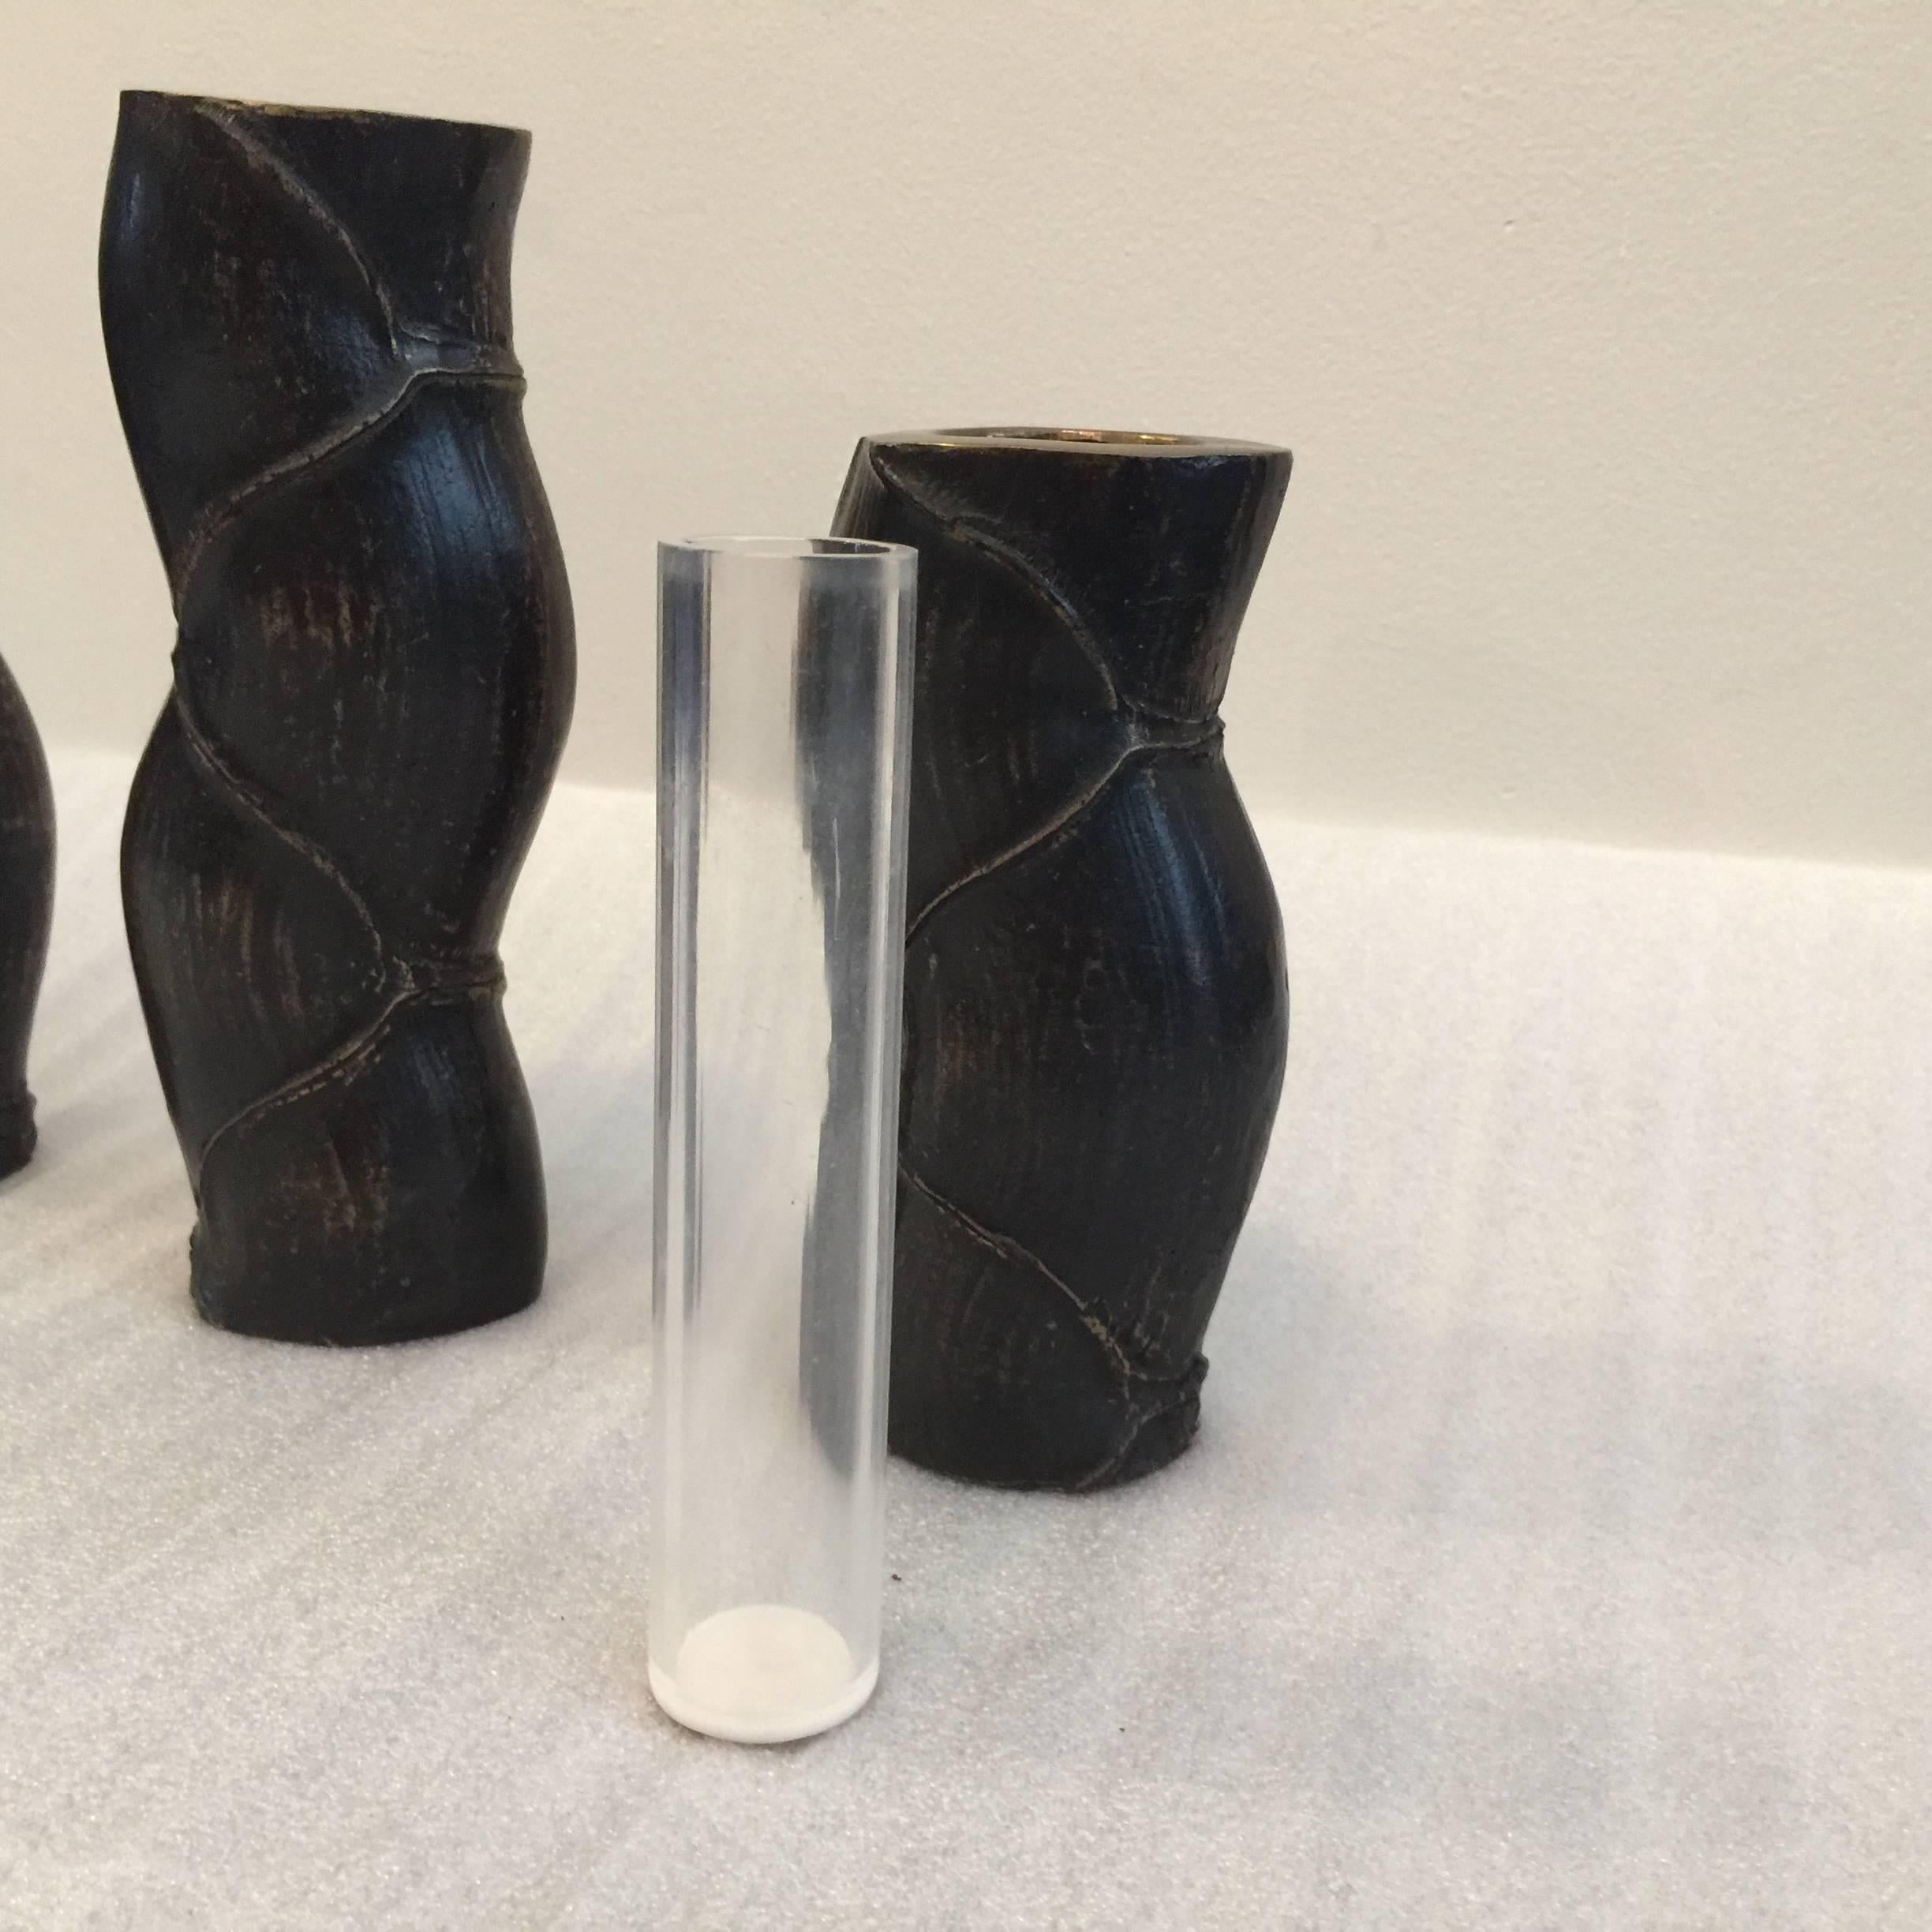 Finely cast bronze, these Japanese bud vases in faux bamboo design come with acrylic insulator to hold water for fresh flowers. These are heavy bronze sculptures/ table elements.

In descending sizes.

Tallest: 9.75 inches tall, 2.75 inches